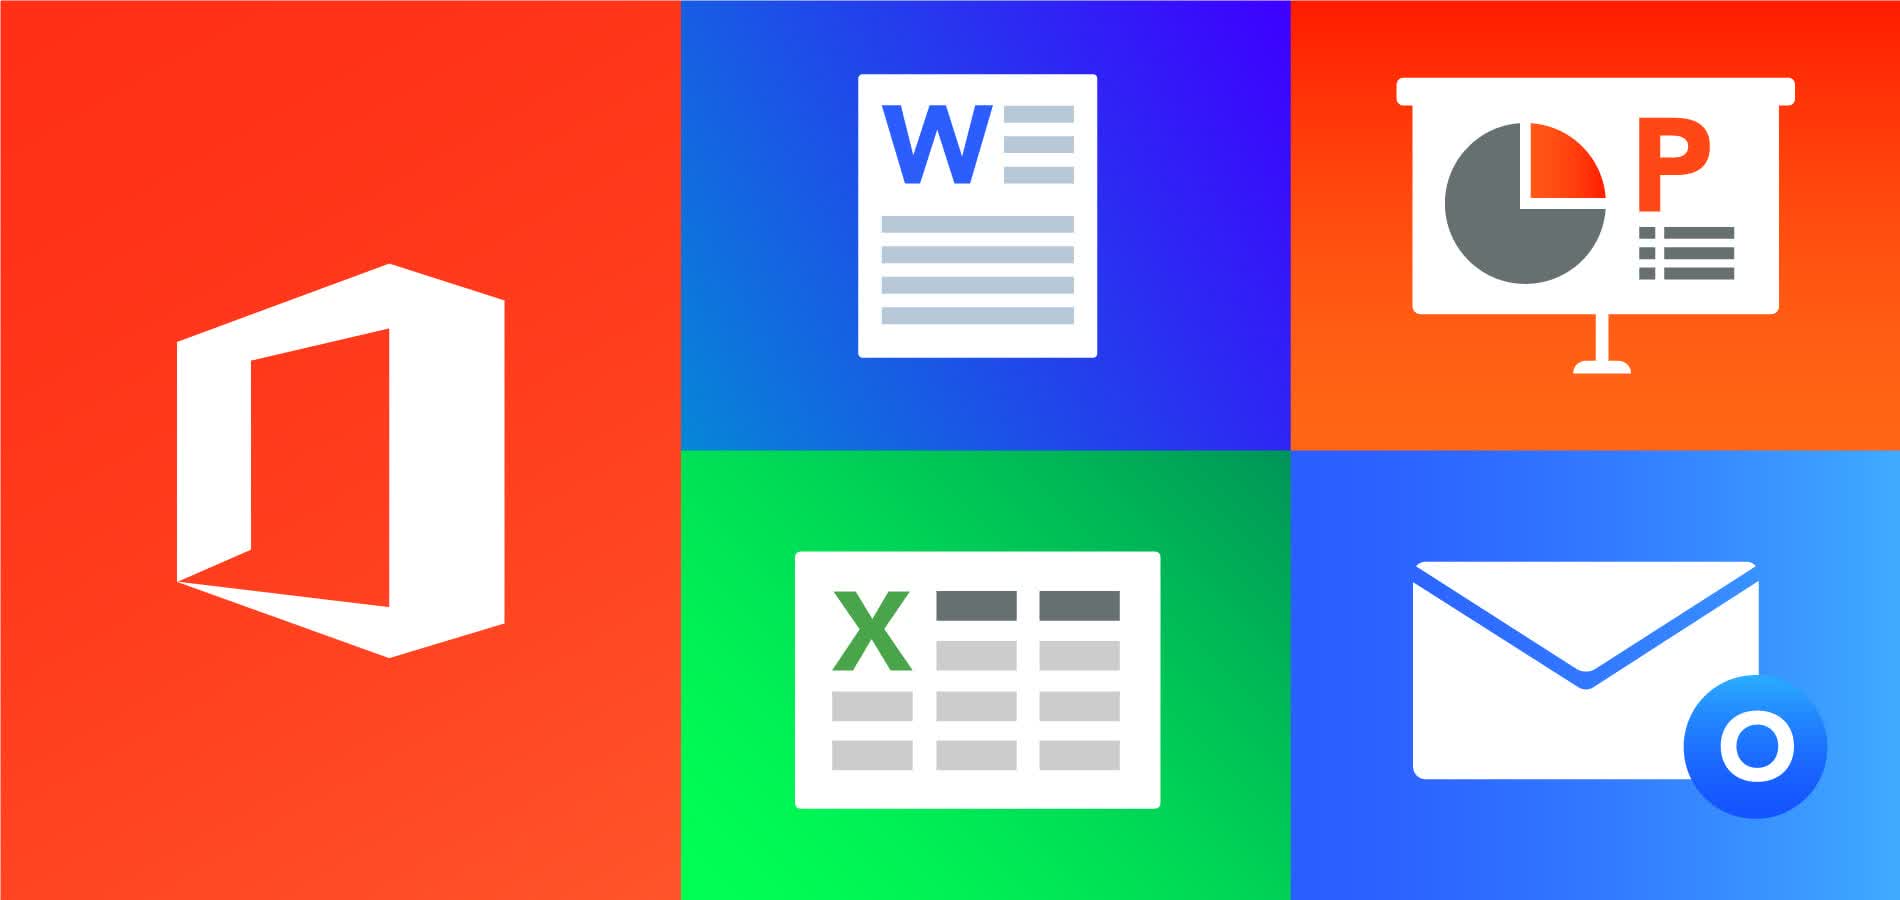 Microsoft details Office 2021 features and pricing ahead of October 5 launch